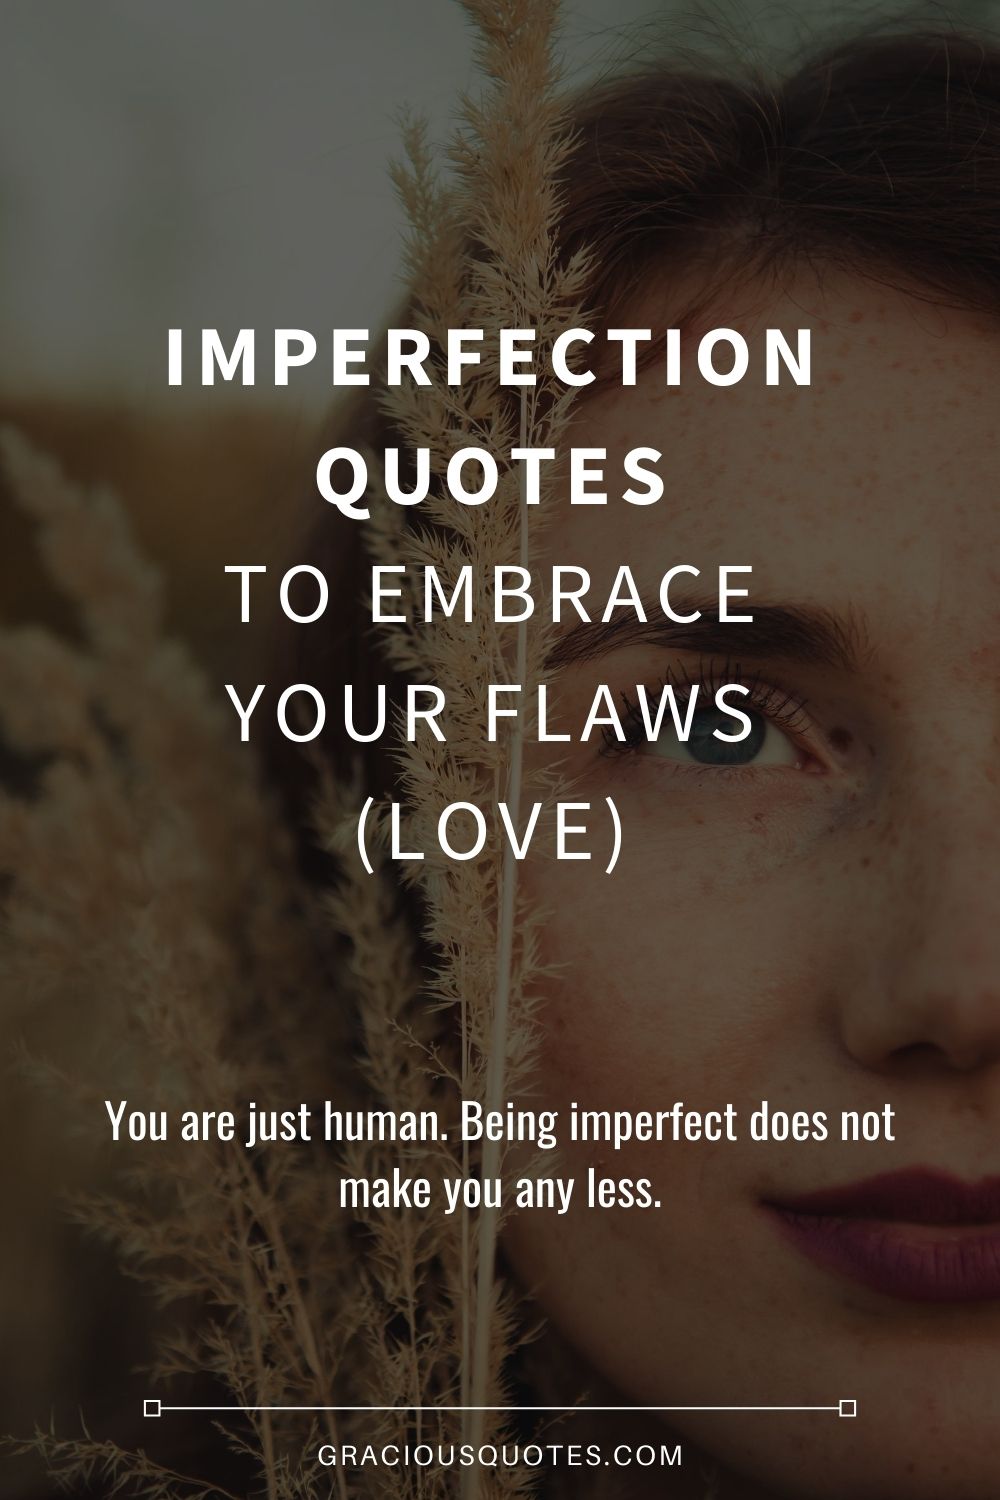 tumblr quotes about imperfection